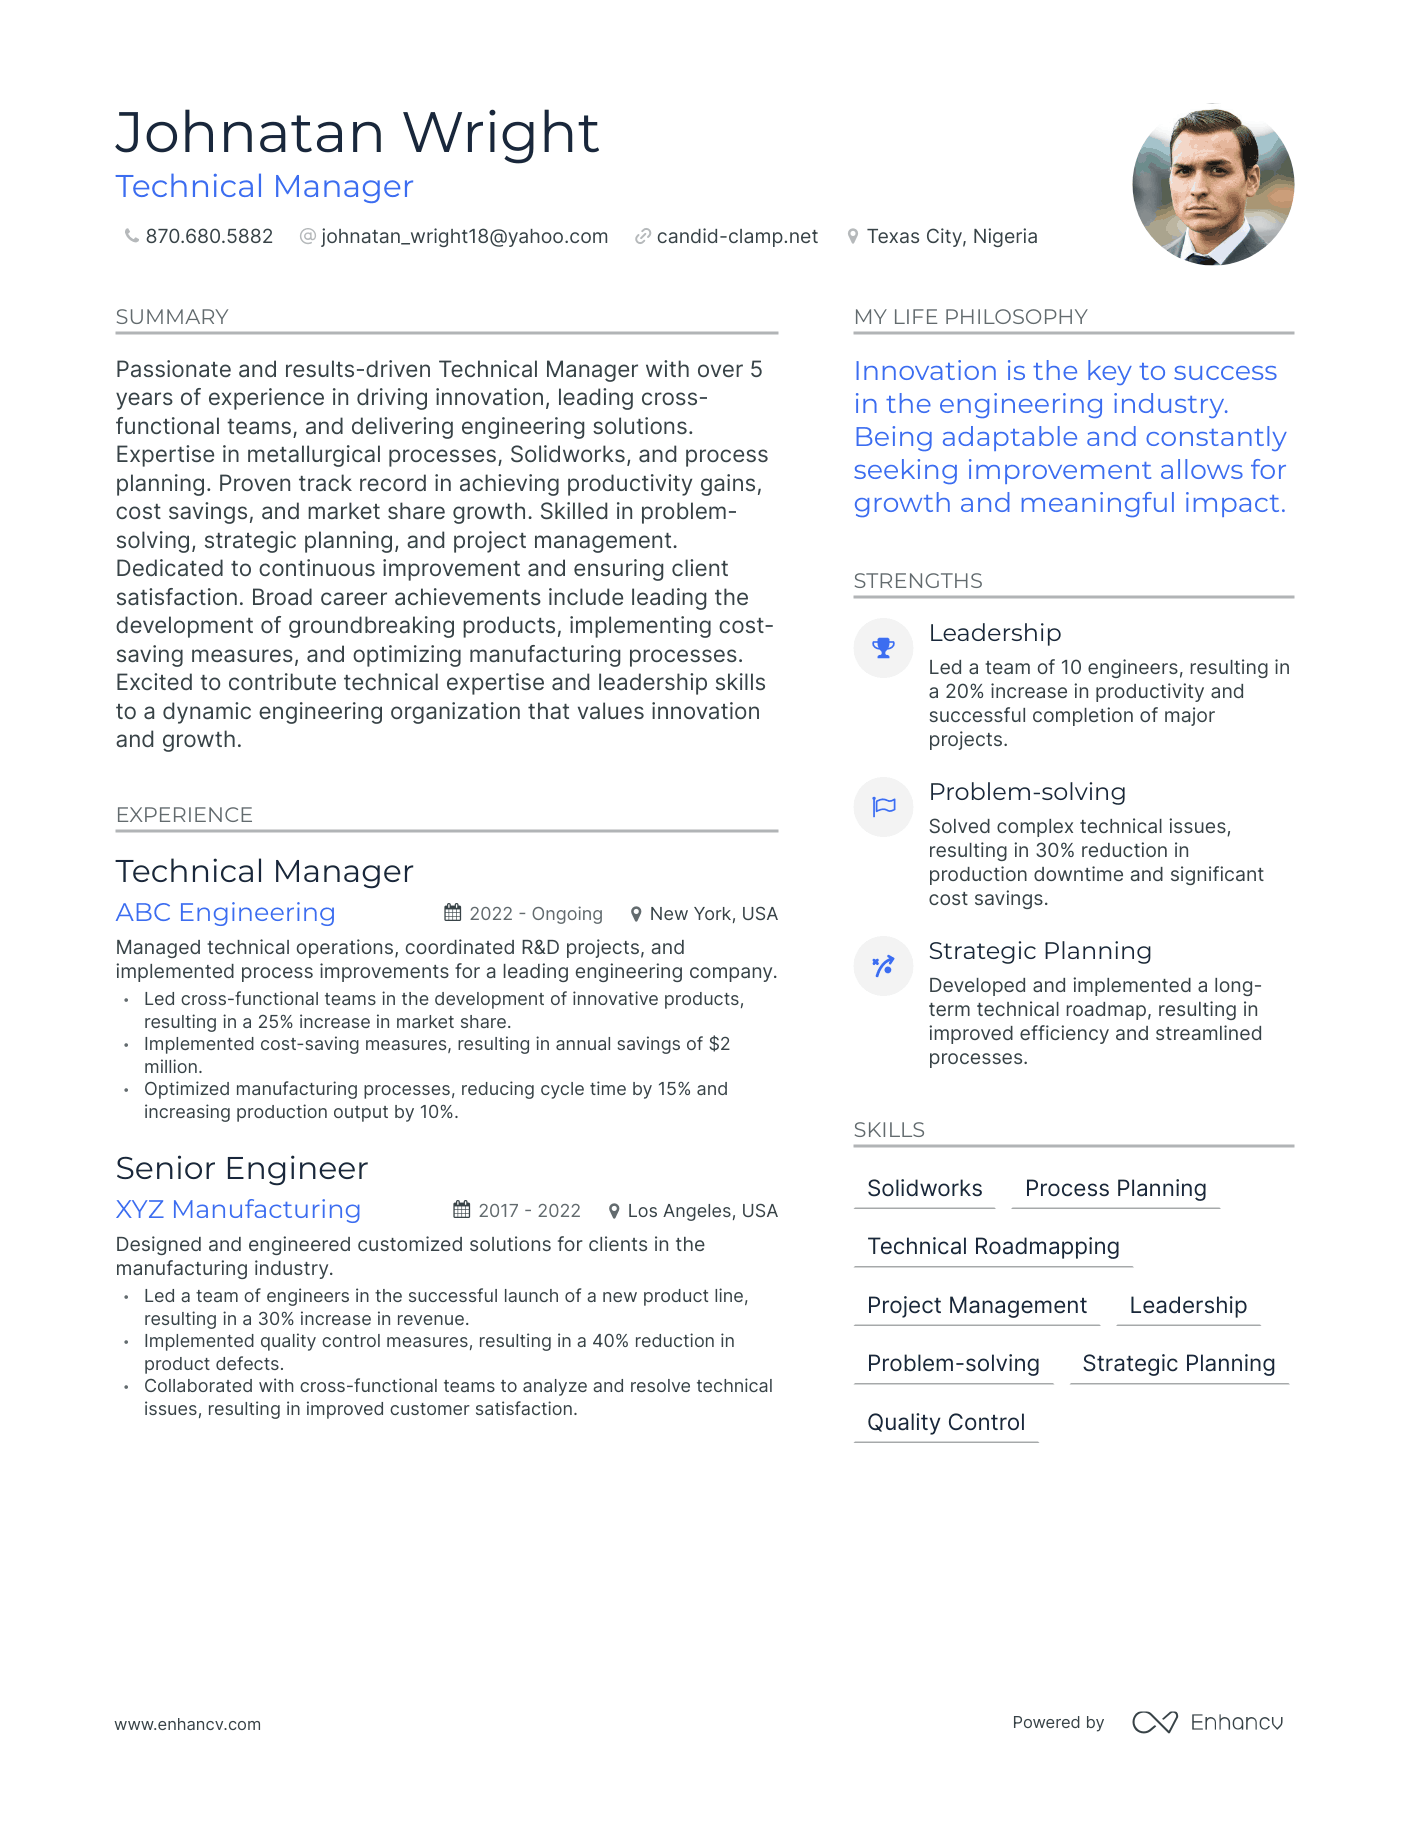 Technical Manager resume example